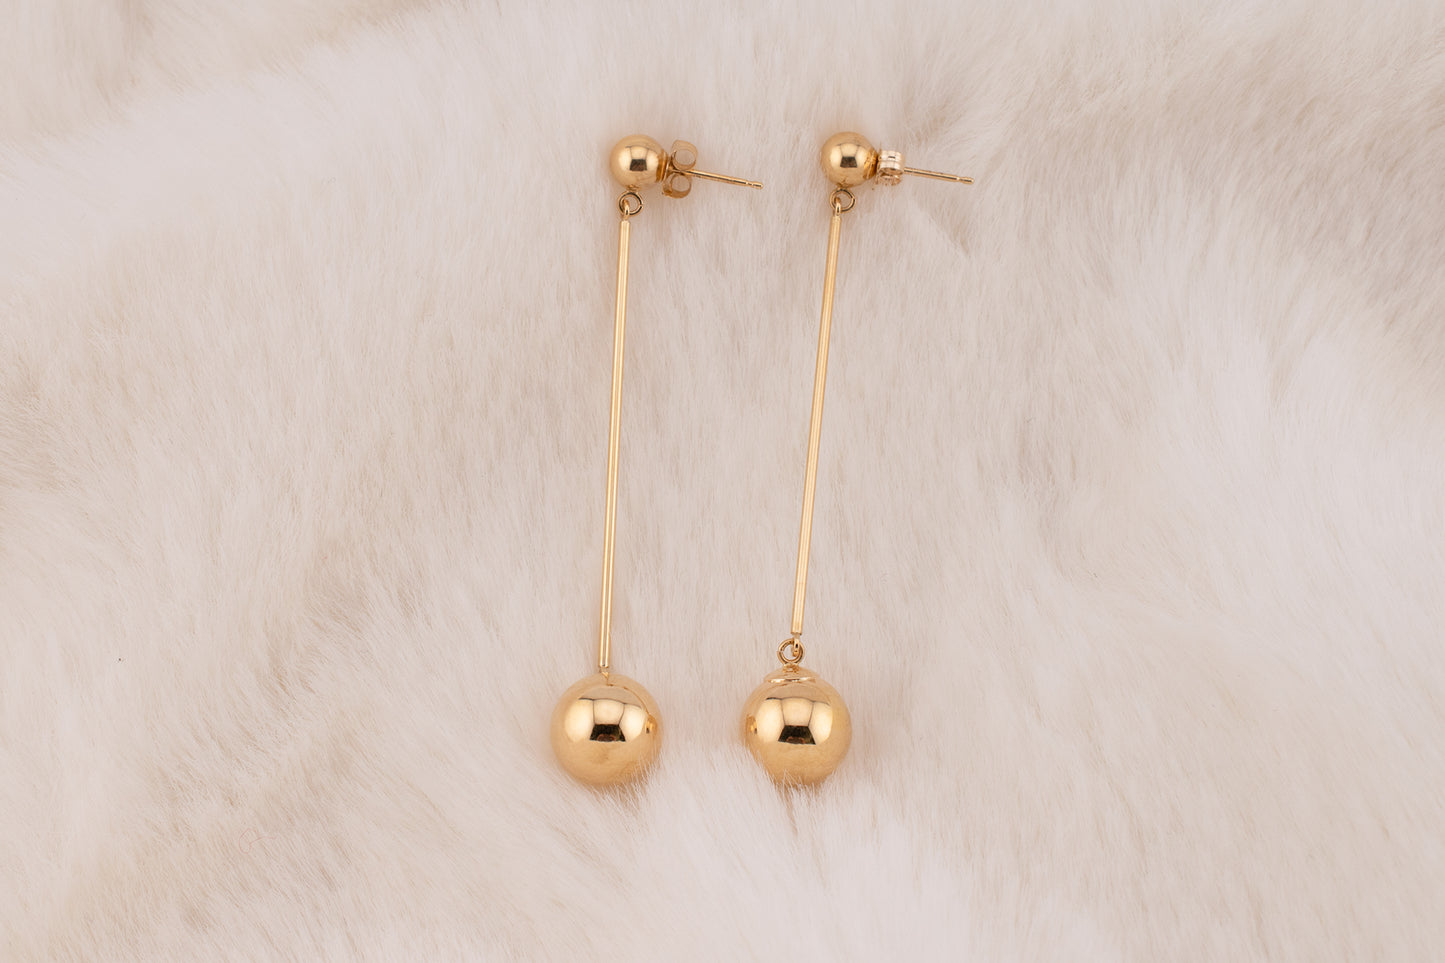 Vintage Estate 14KT Yellow Gold High Polish Contemporary Ball Drop Earrings 2 Inches